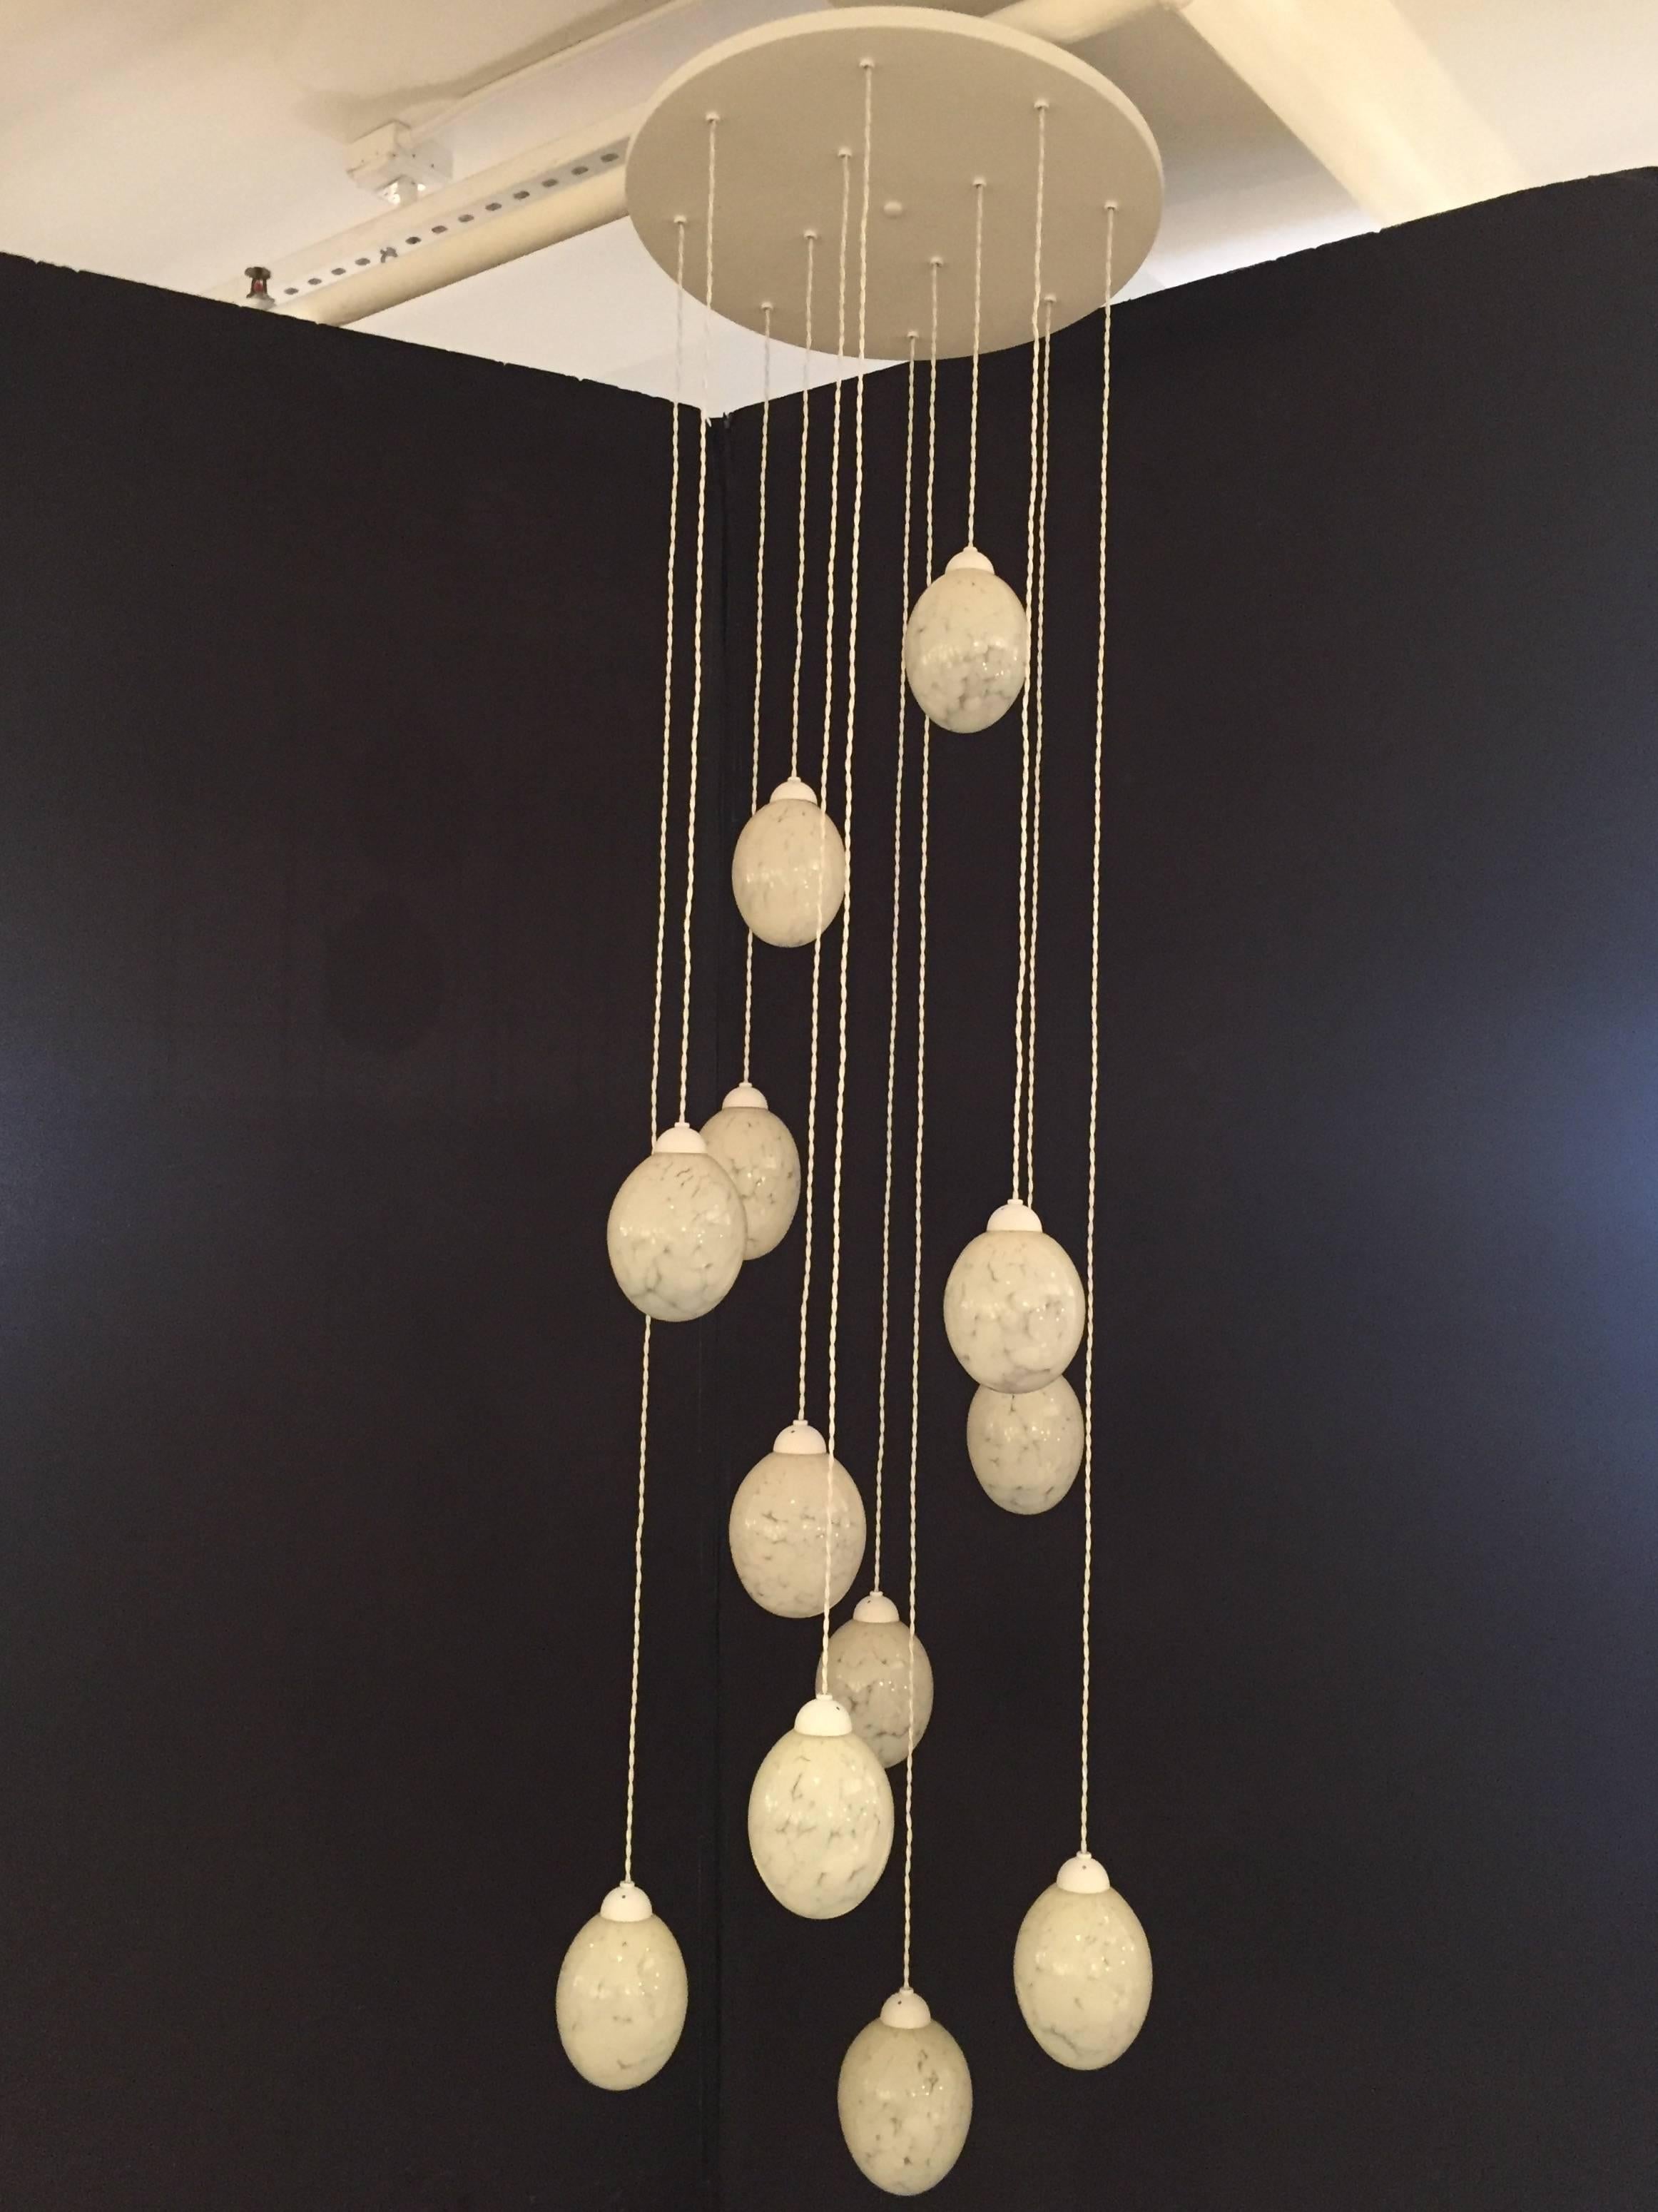 12 handblown globes suspended from a circular canopy. White enamel finish with white silk twisted wire. Wires can be shortened on site. Each glass diffuser hold one candelabra based bulb 40 watt max. 